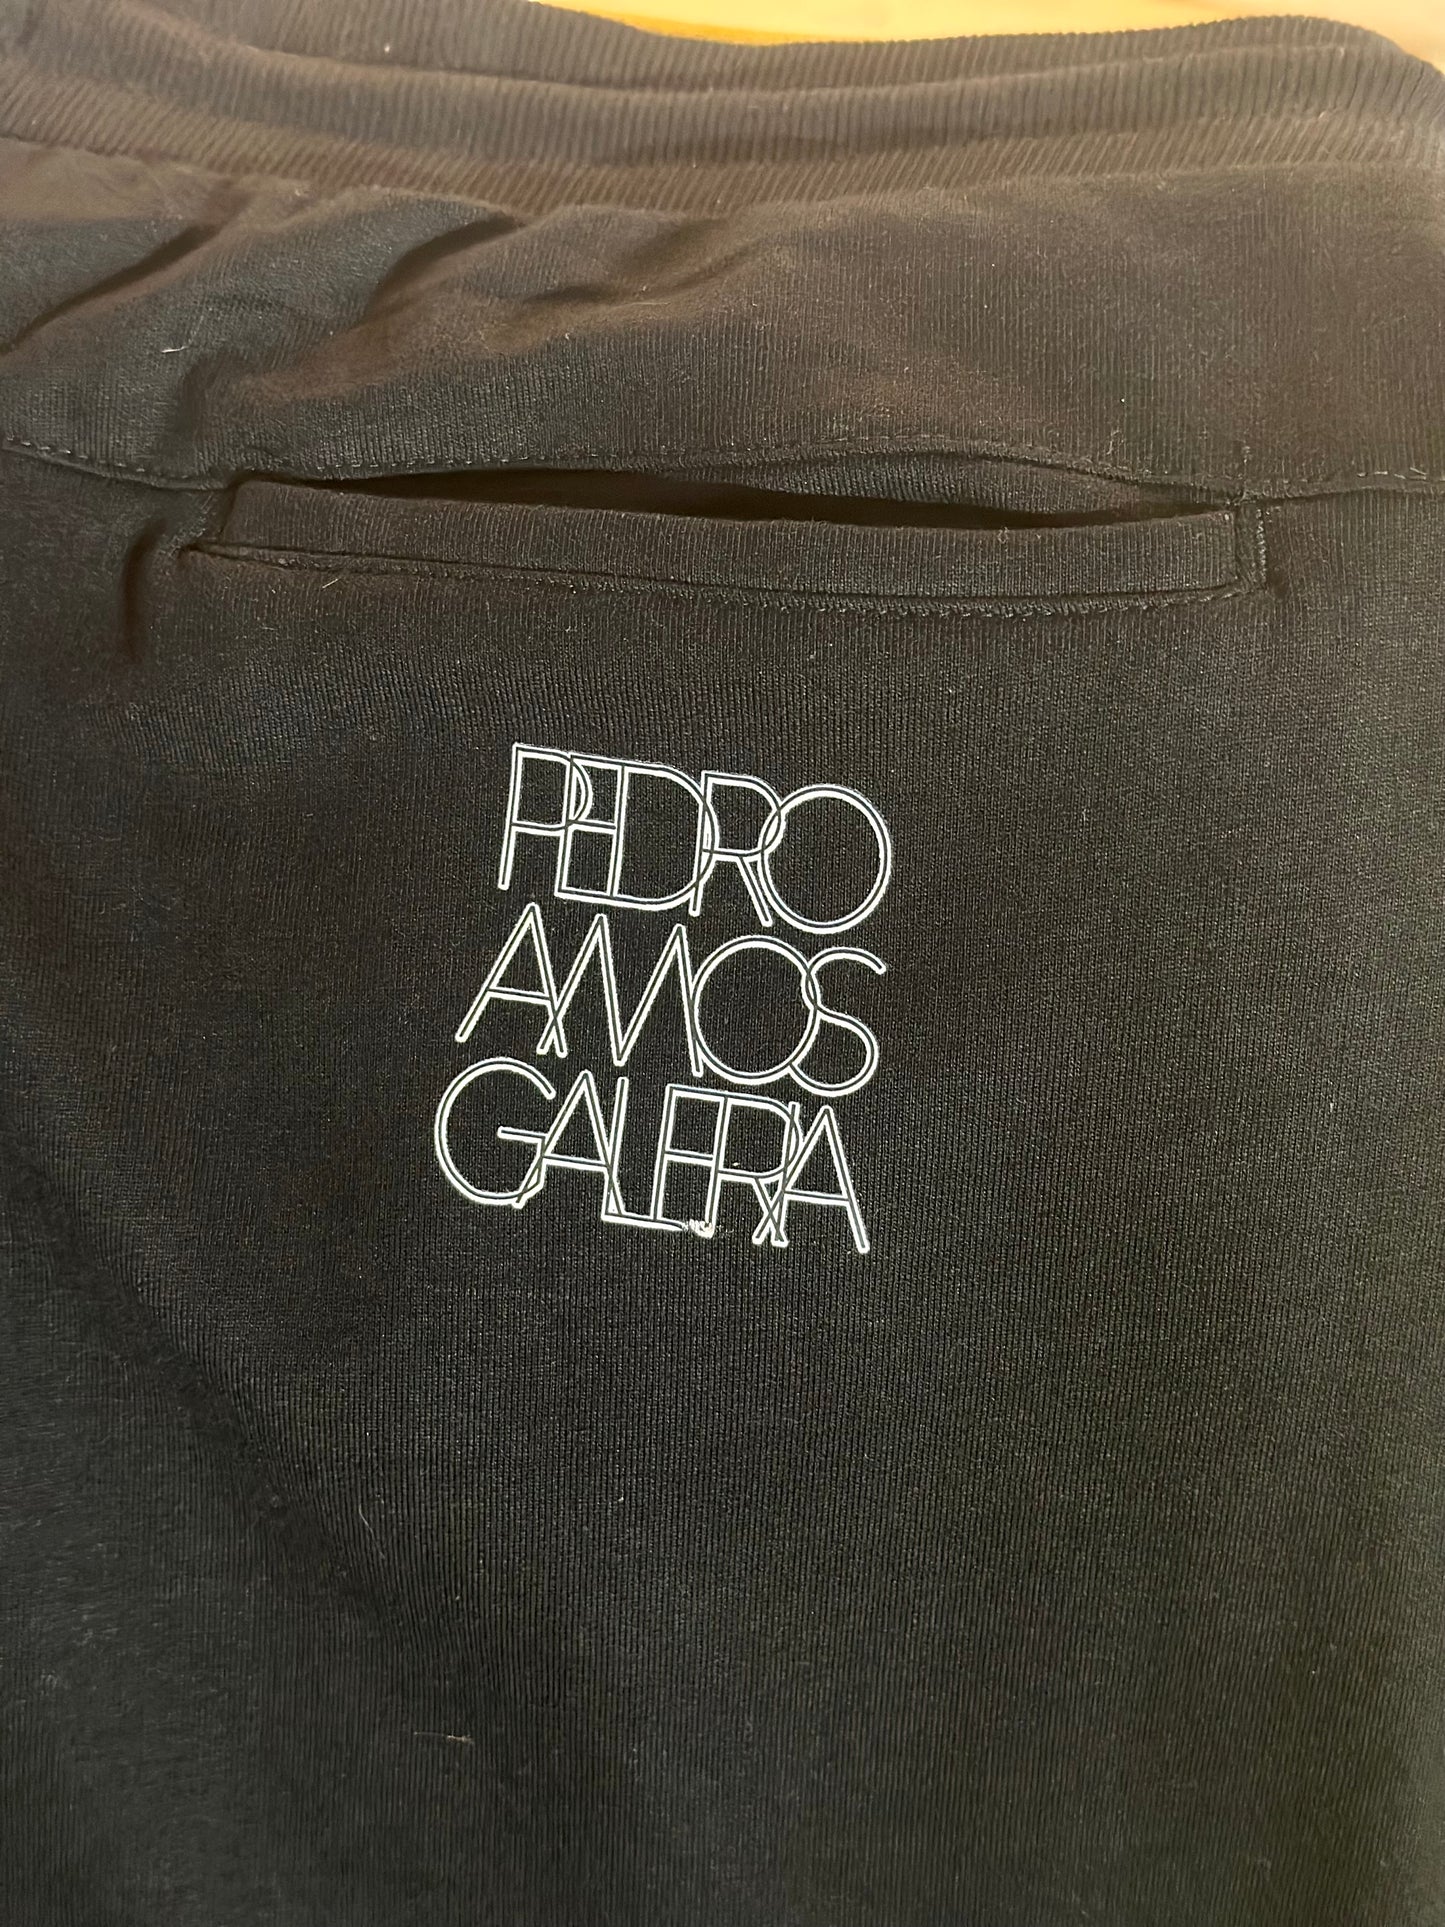 "Galeria Alien" Joggers by Pedro AMOS - Size Mens Large